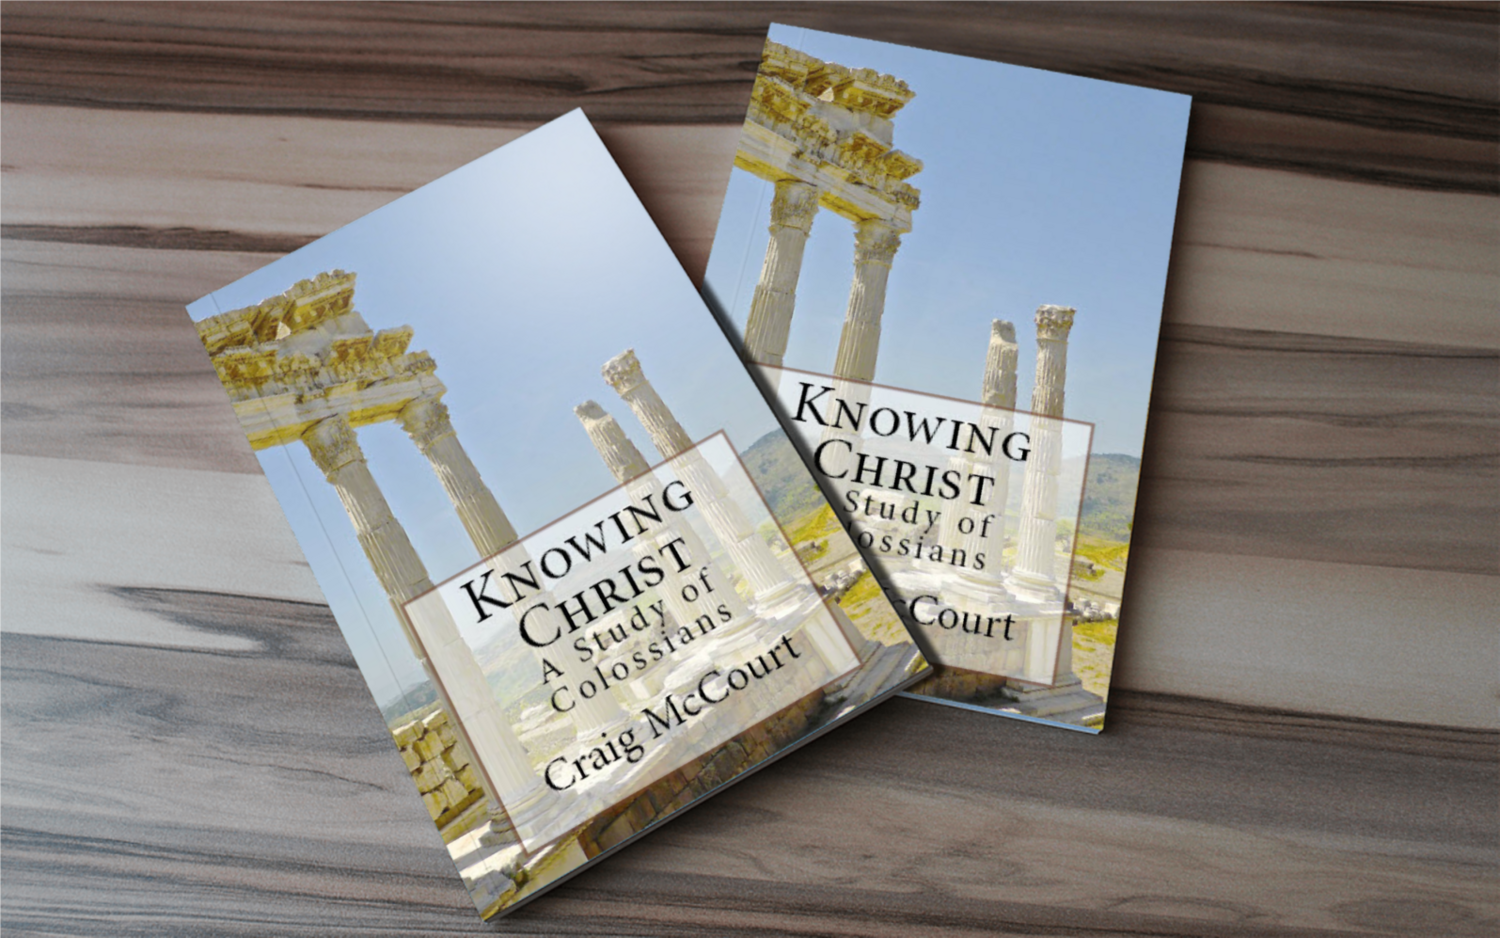 Knowing Christ -small group bible study on Colossians